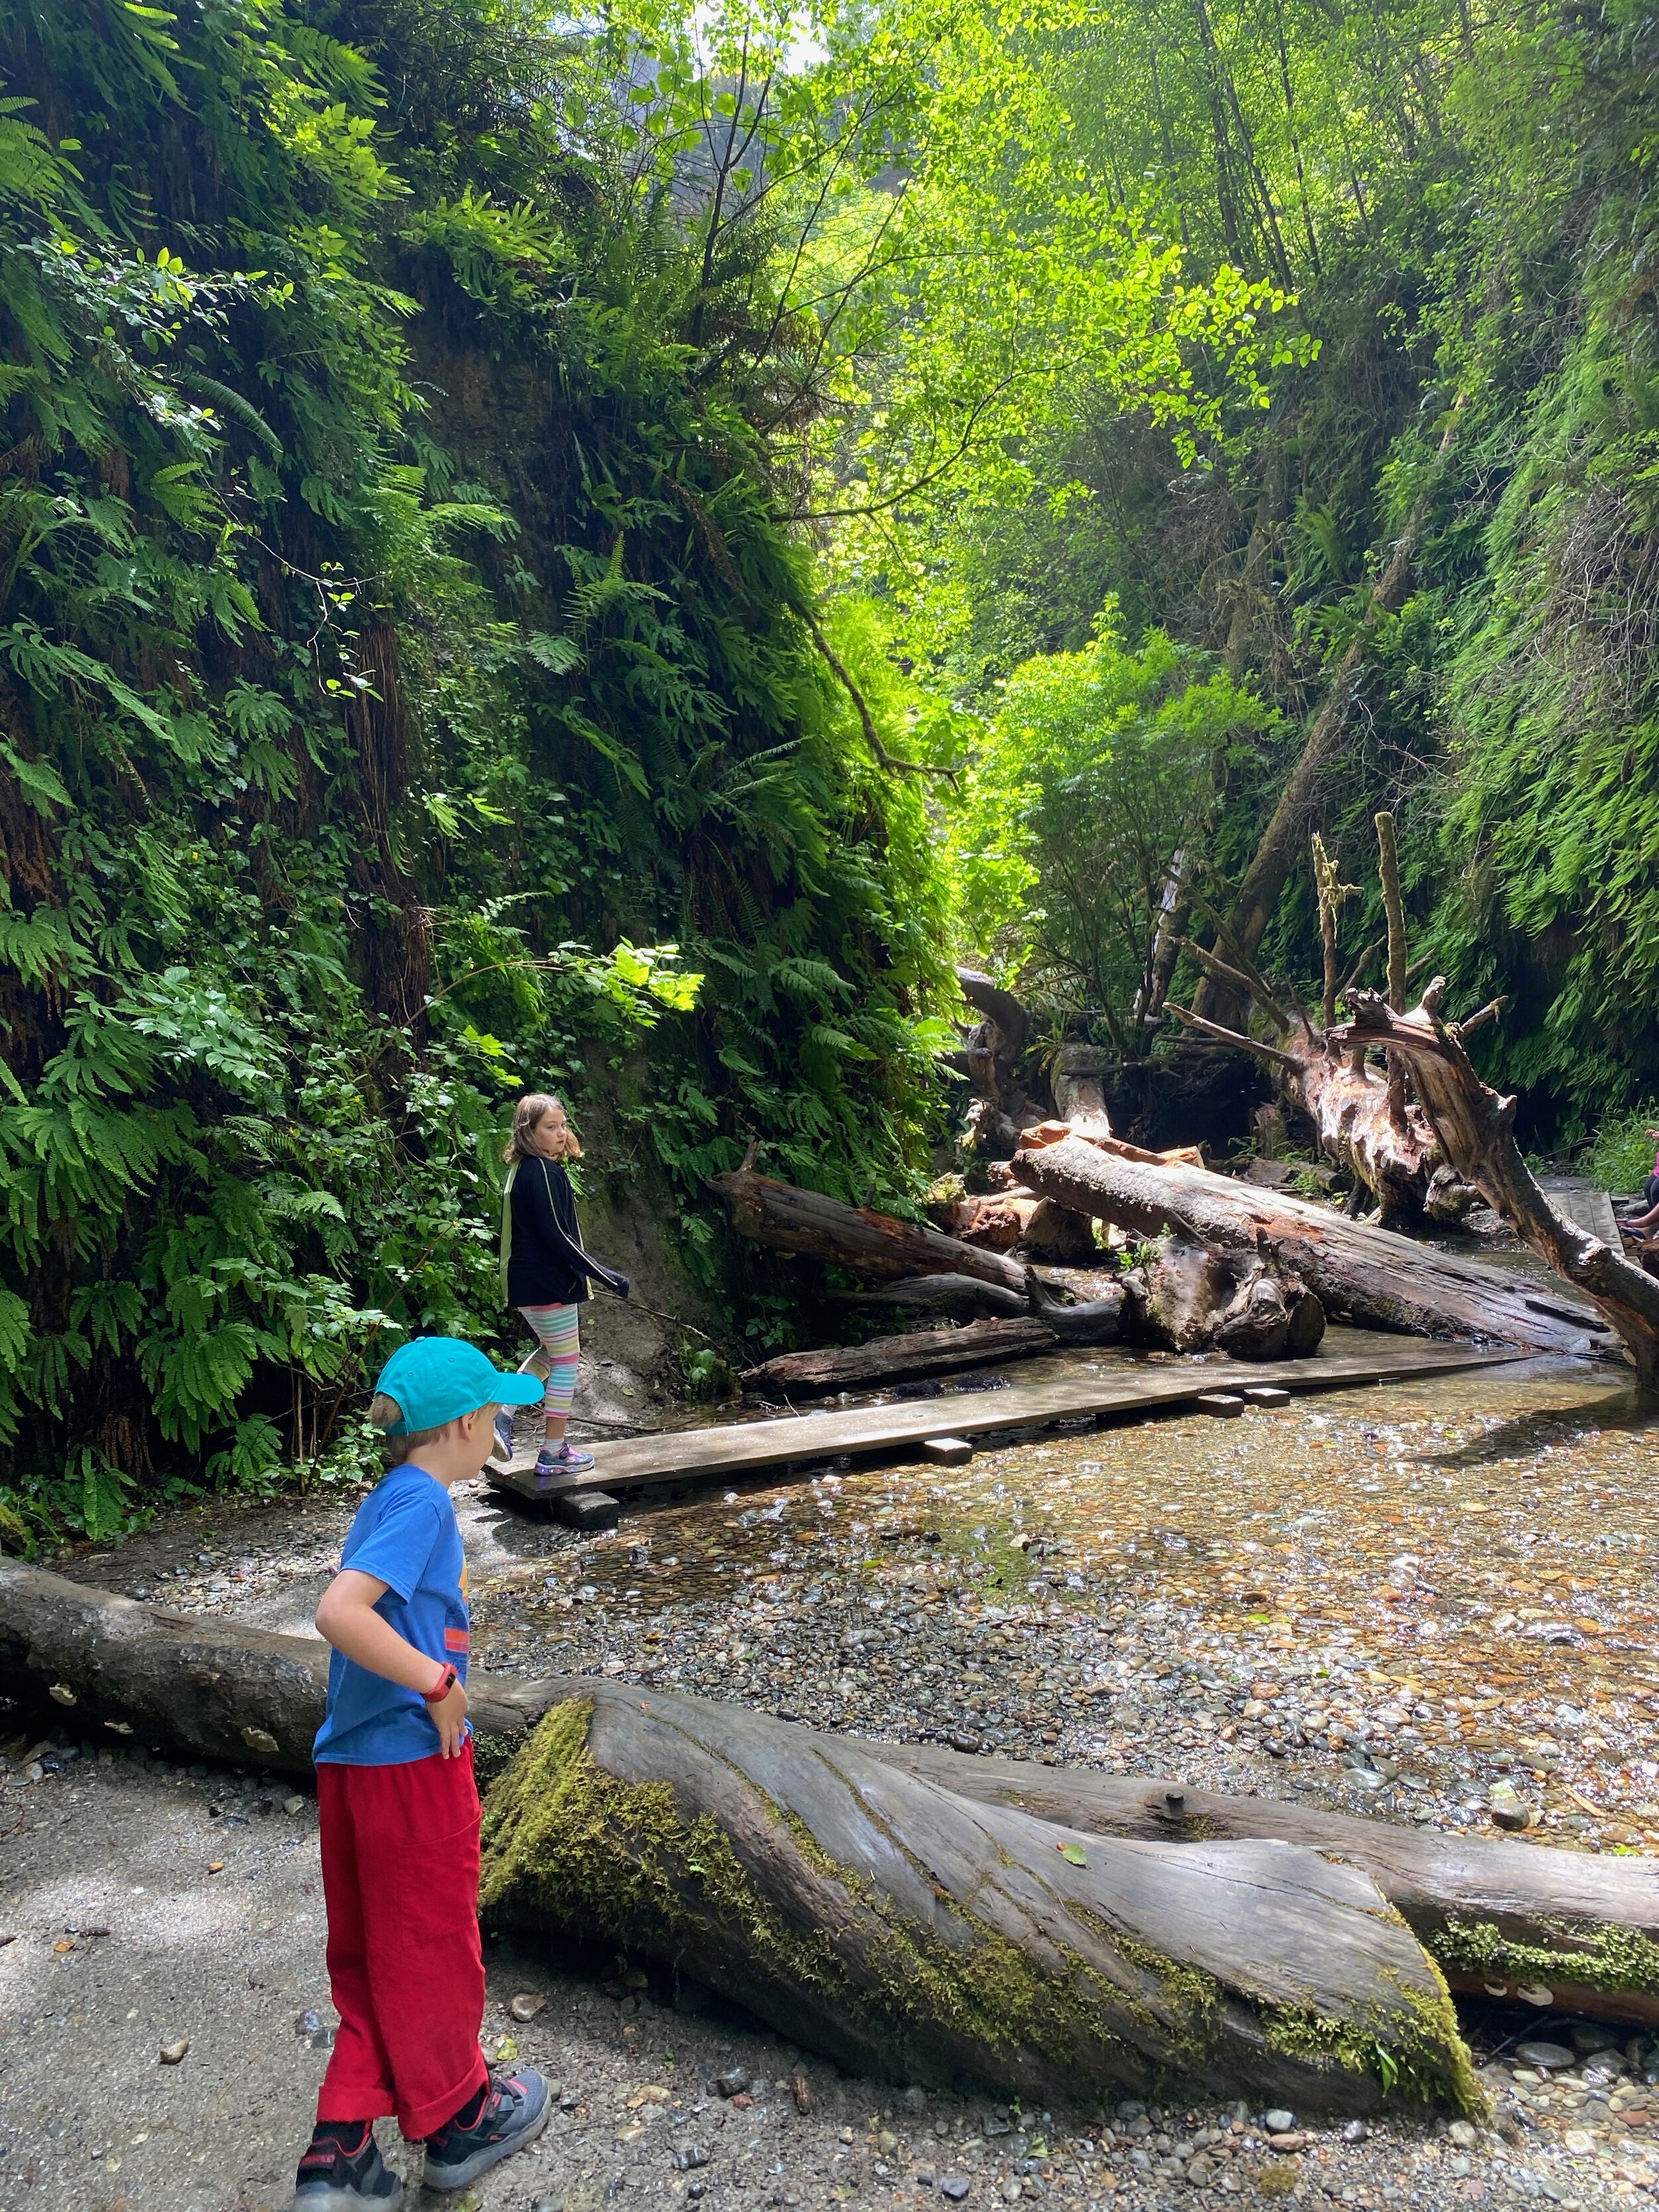 The kids loved the hurdles of Fern Canyon